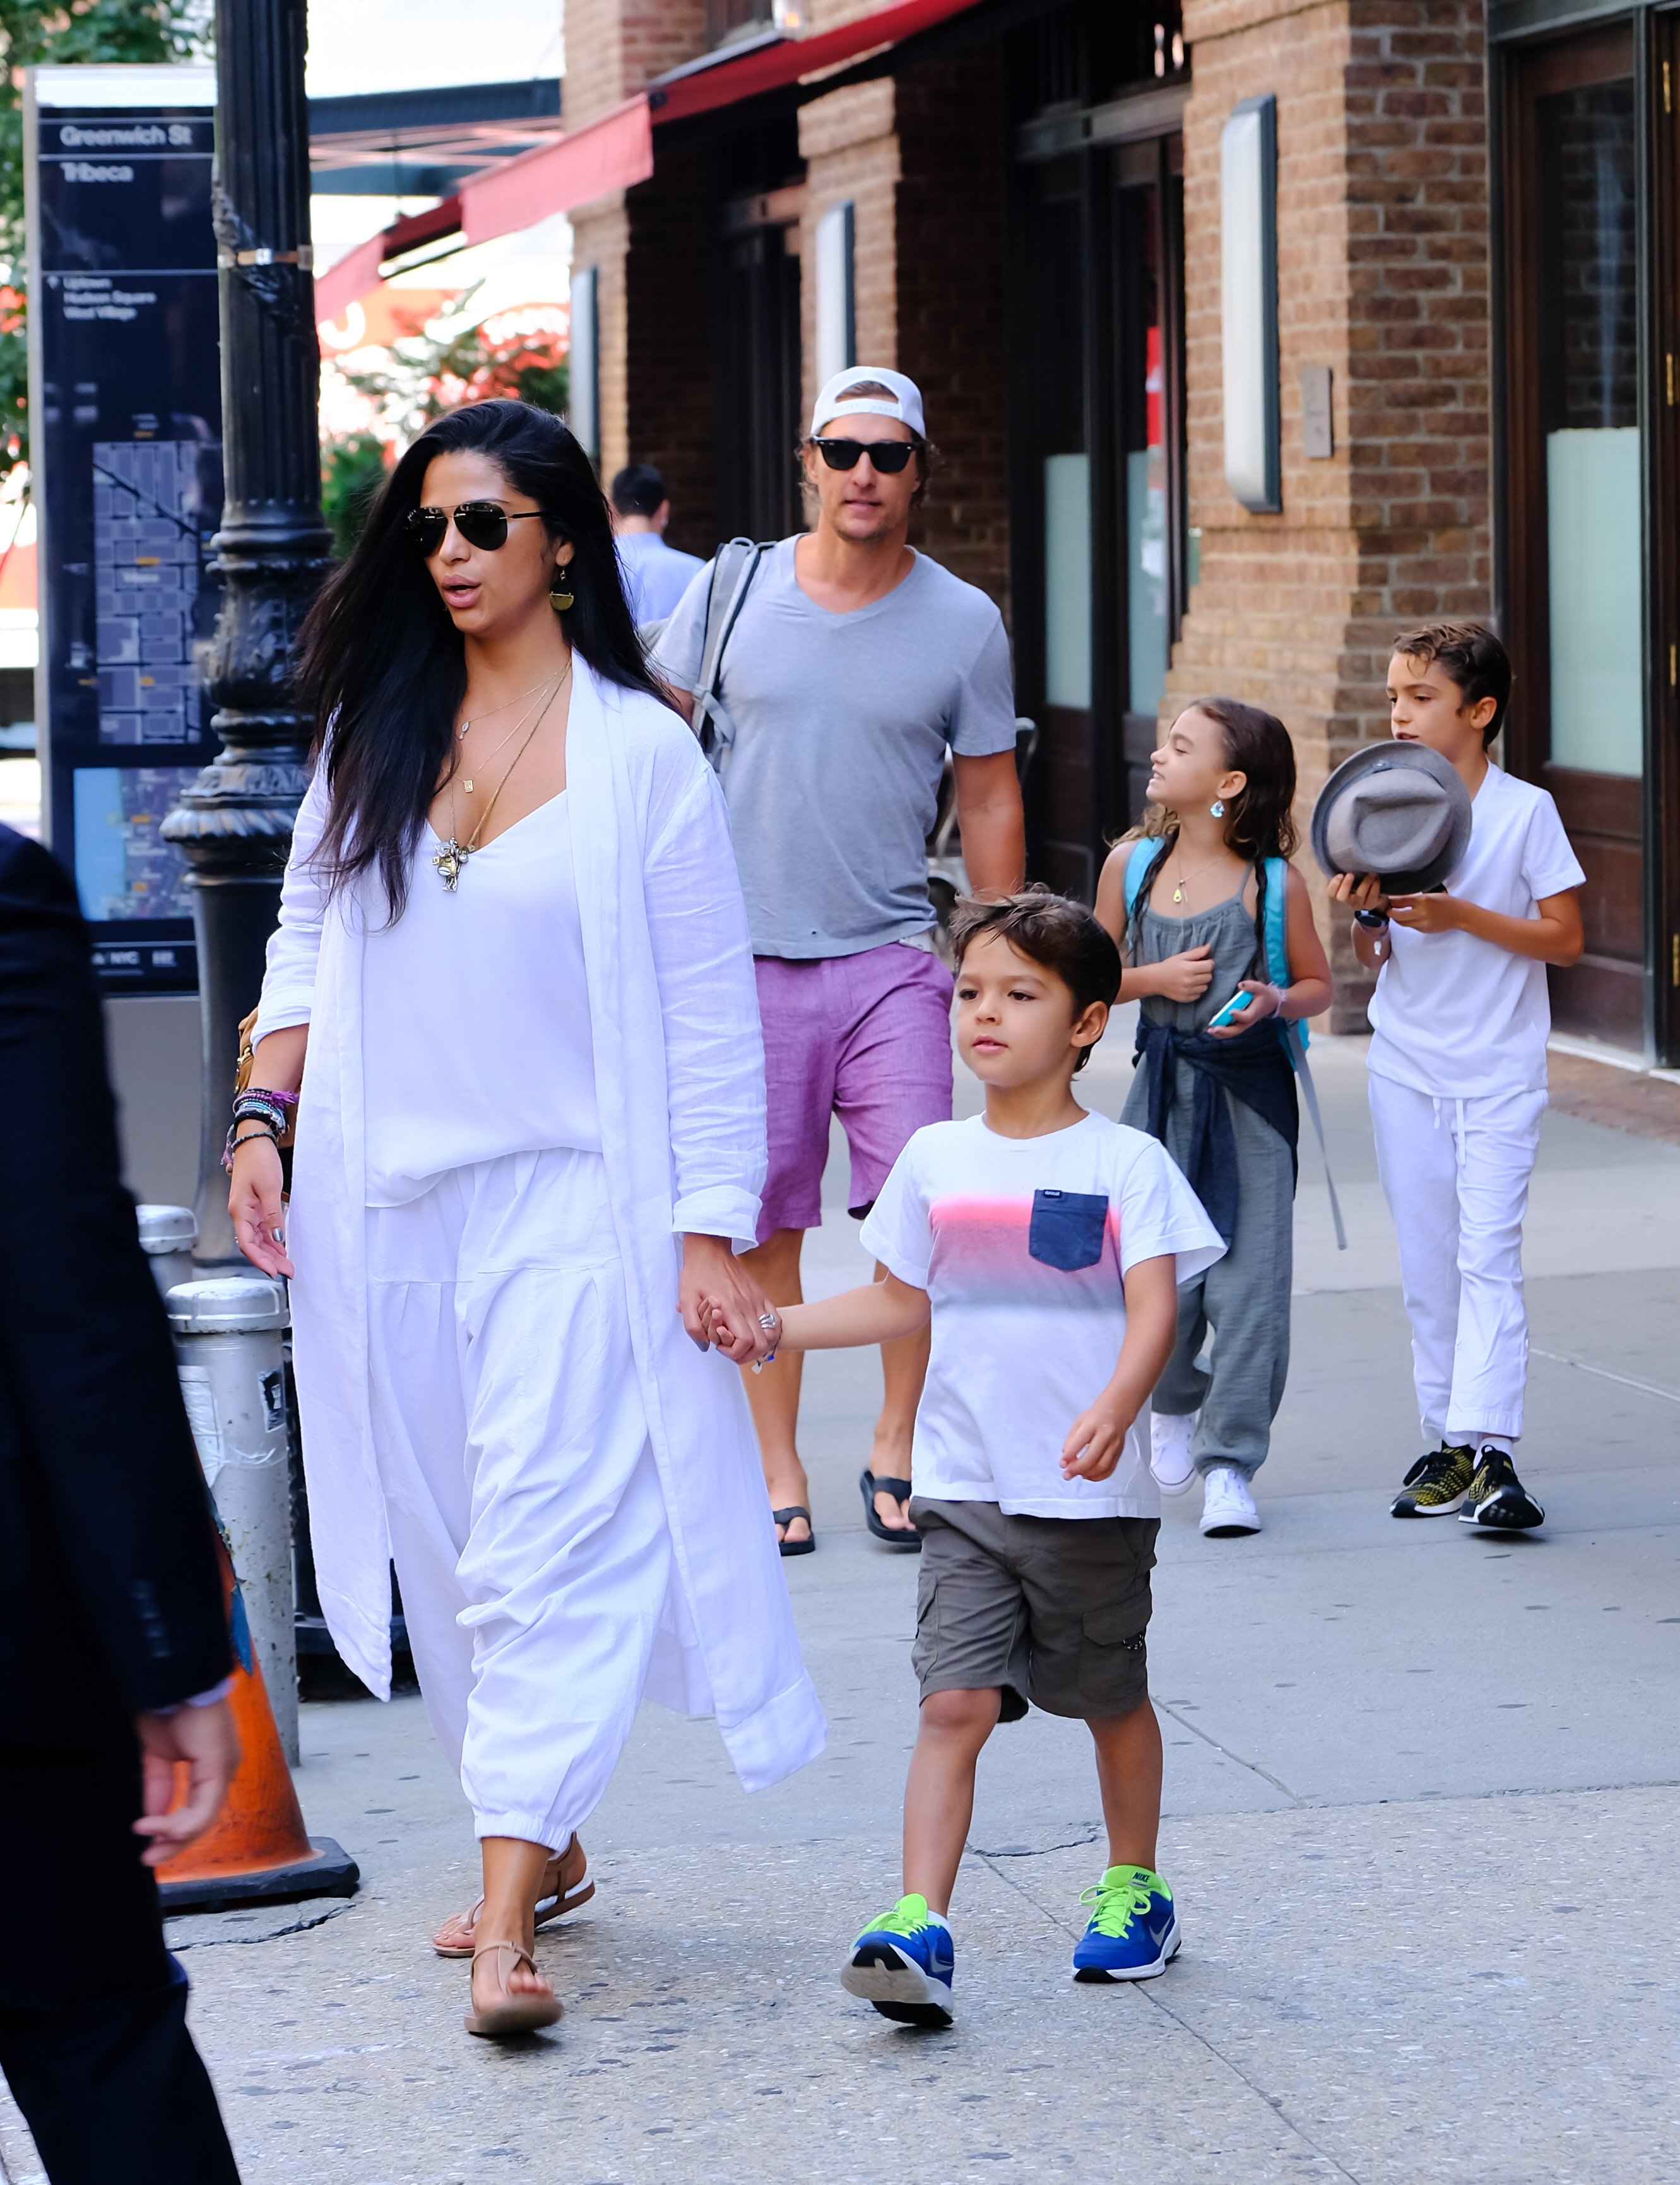 Matthew McConaughey, Camila Alves, and their children spotted in Soho on August 8, 2018 in New York City. | Source: Getty Images